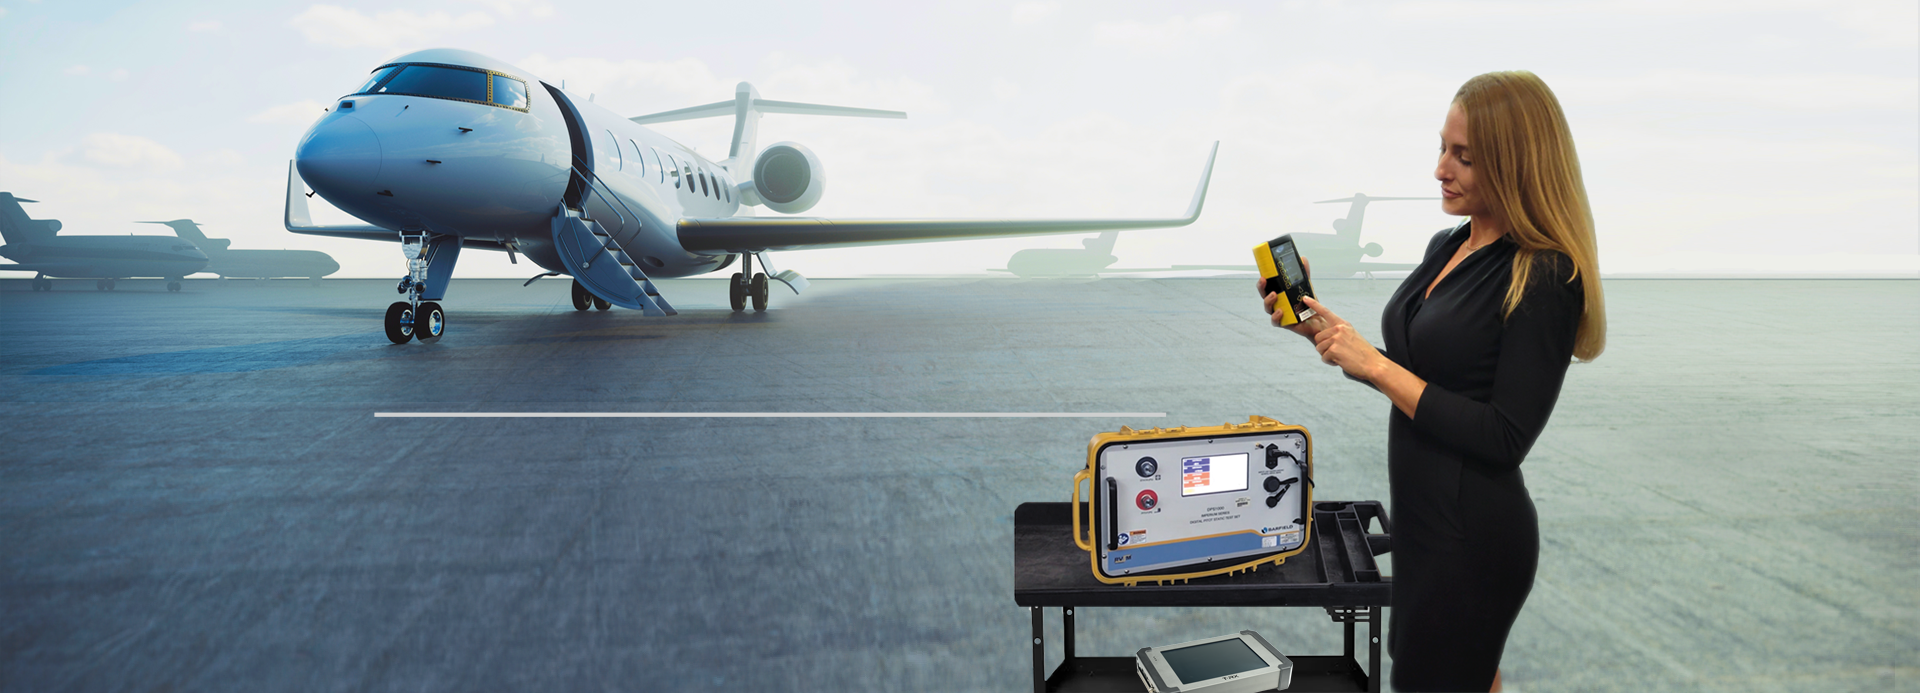 Aviation test equipment and tooling experts you can trust